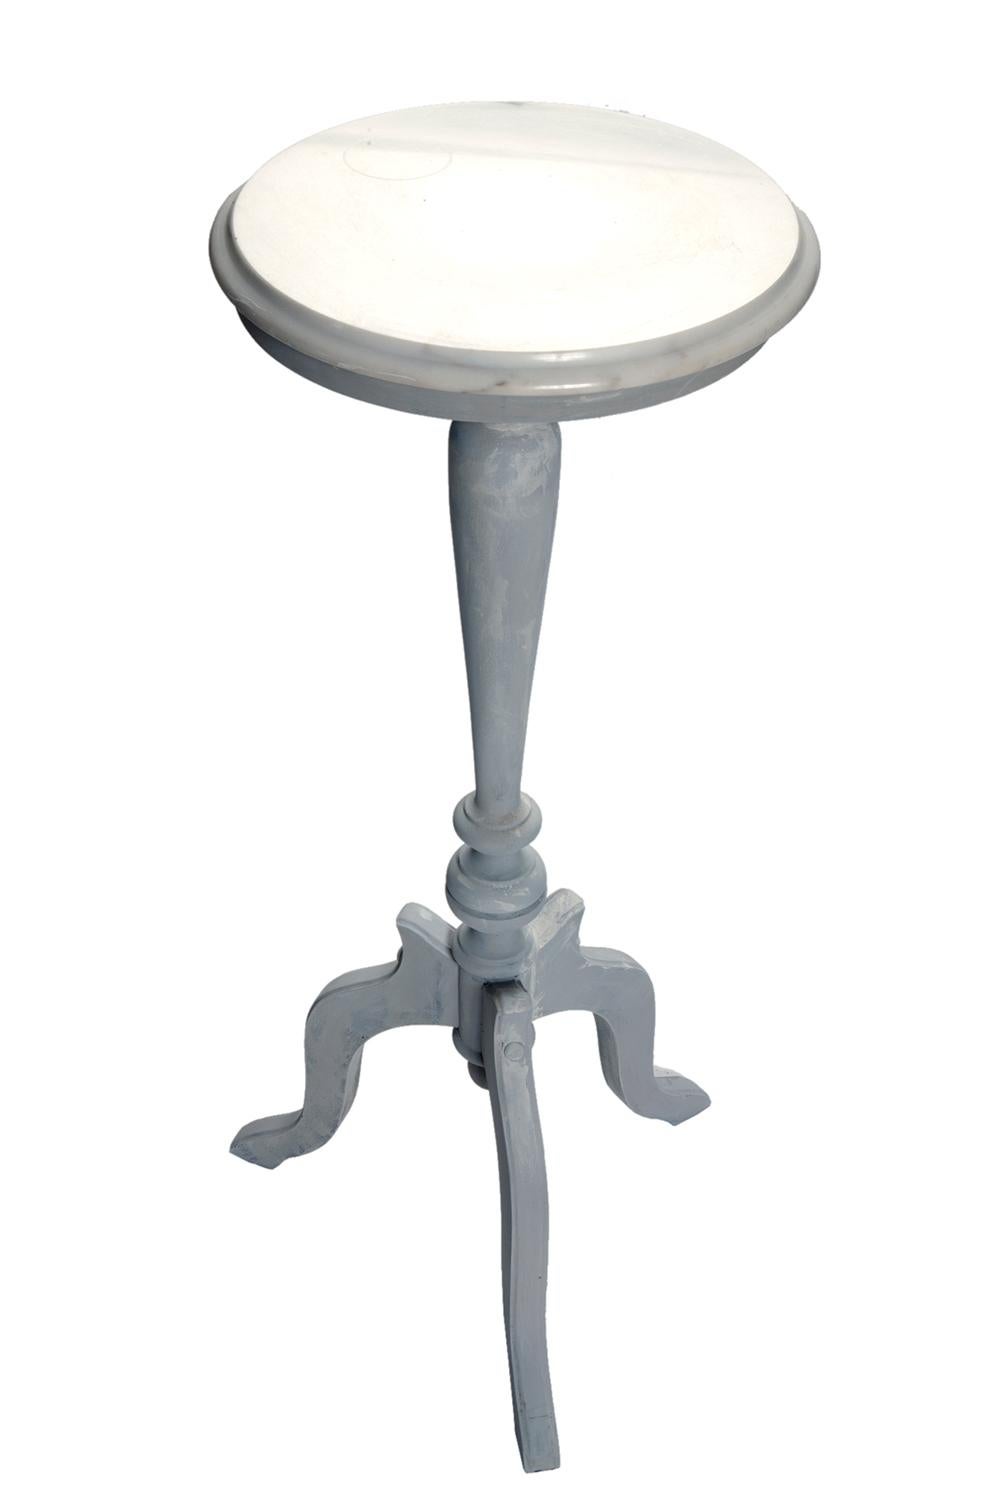 Turned Pale Blue Gray Pedestal Table with Marble Top Plant or Pillar Stand